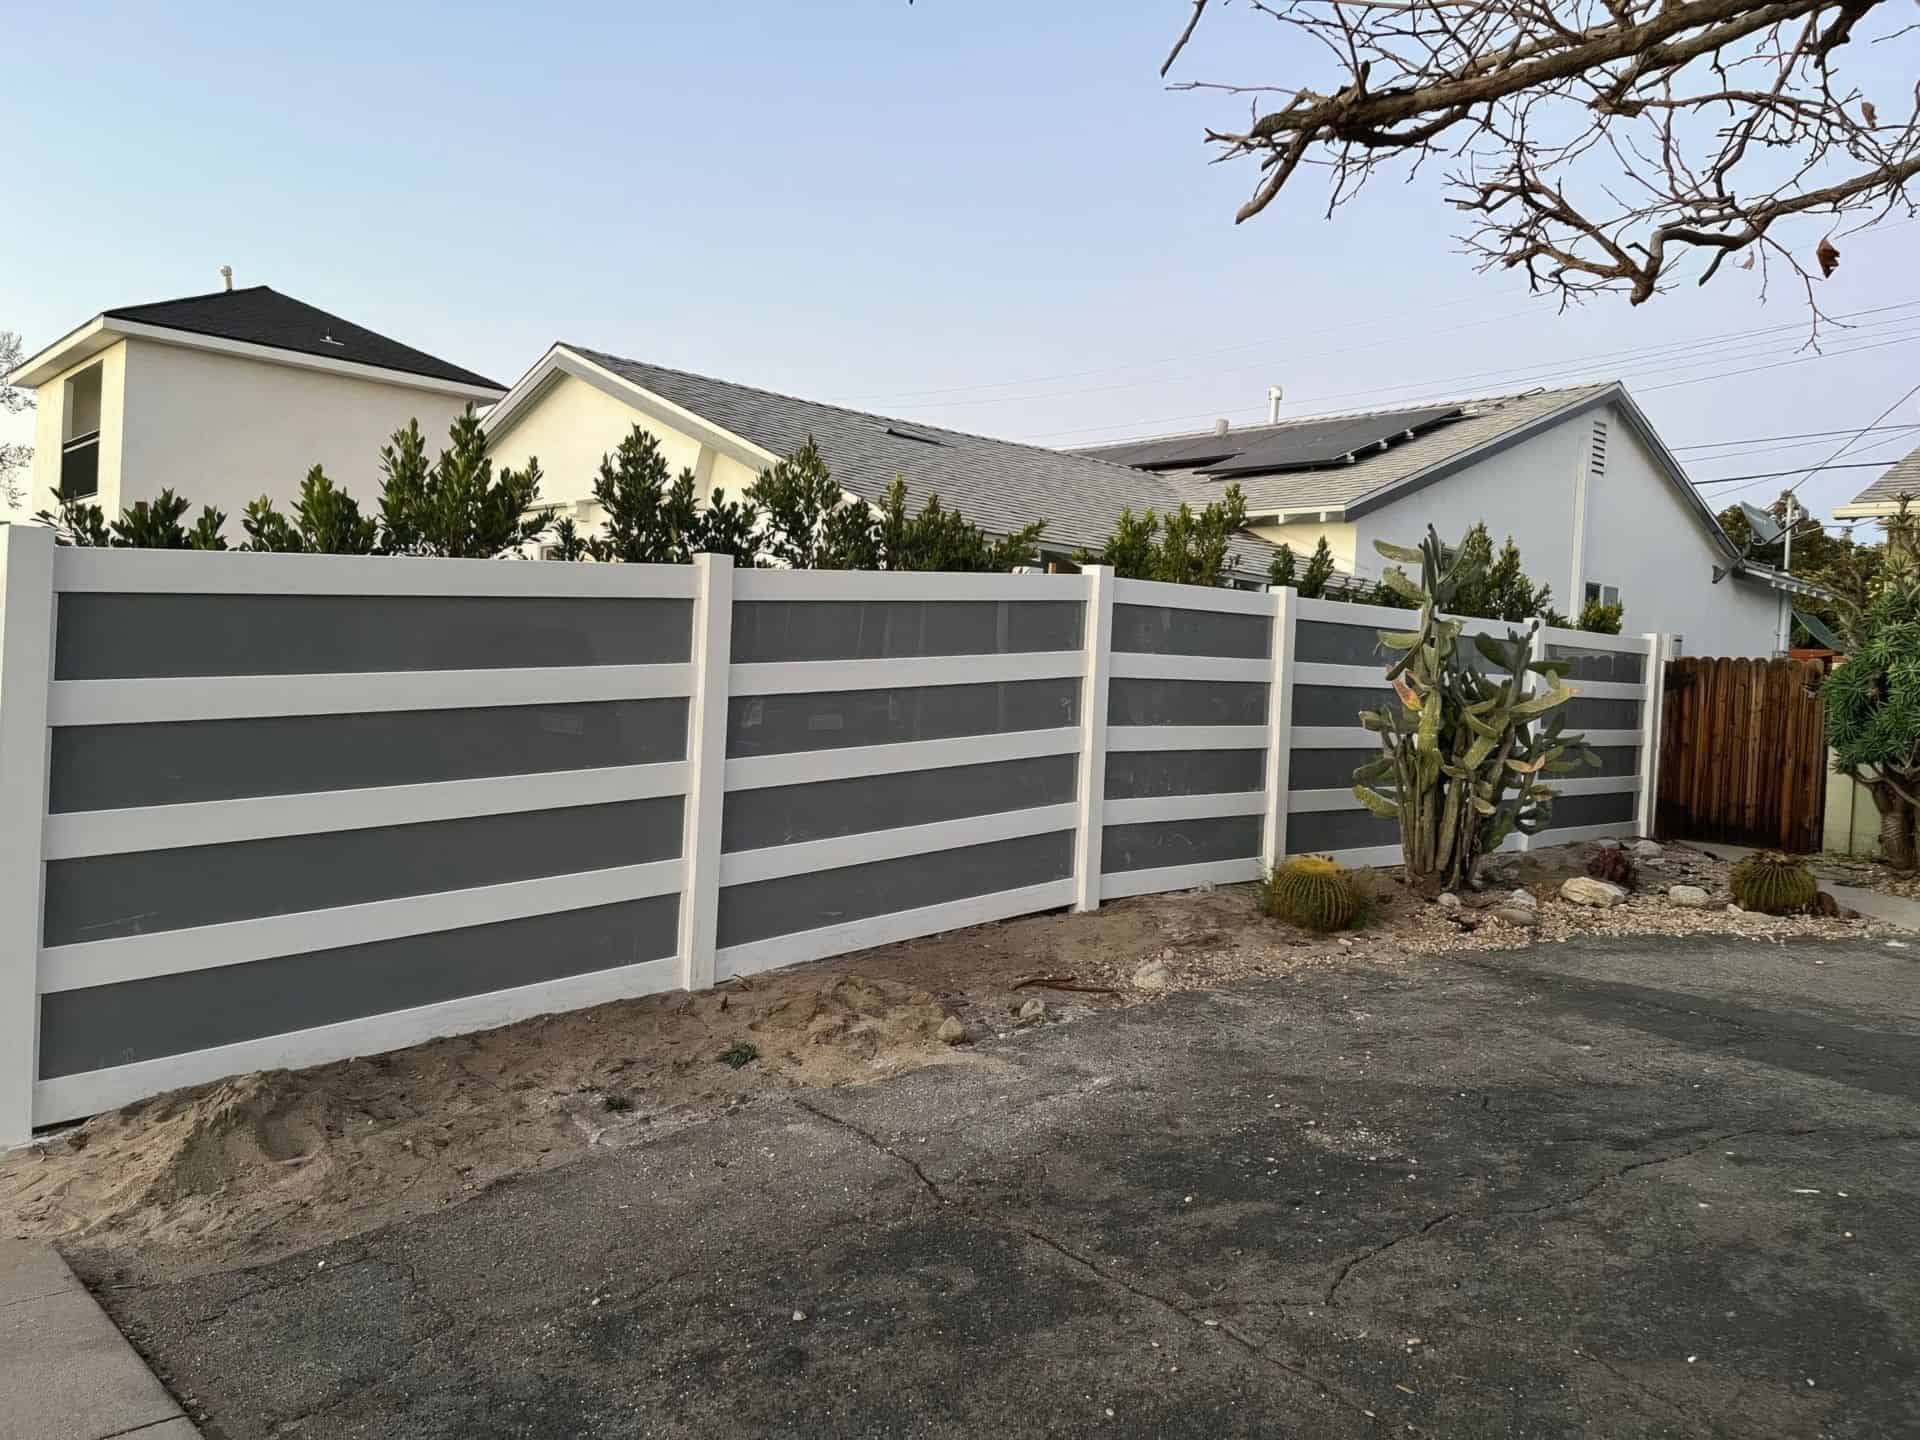 Vinyl & acrylic privacy fence, concrete sidewalk, enhanced privacy with trees & houses in background.